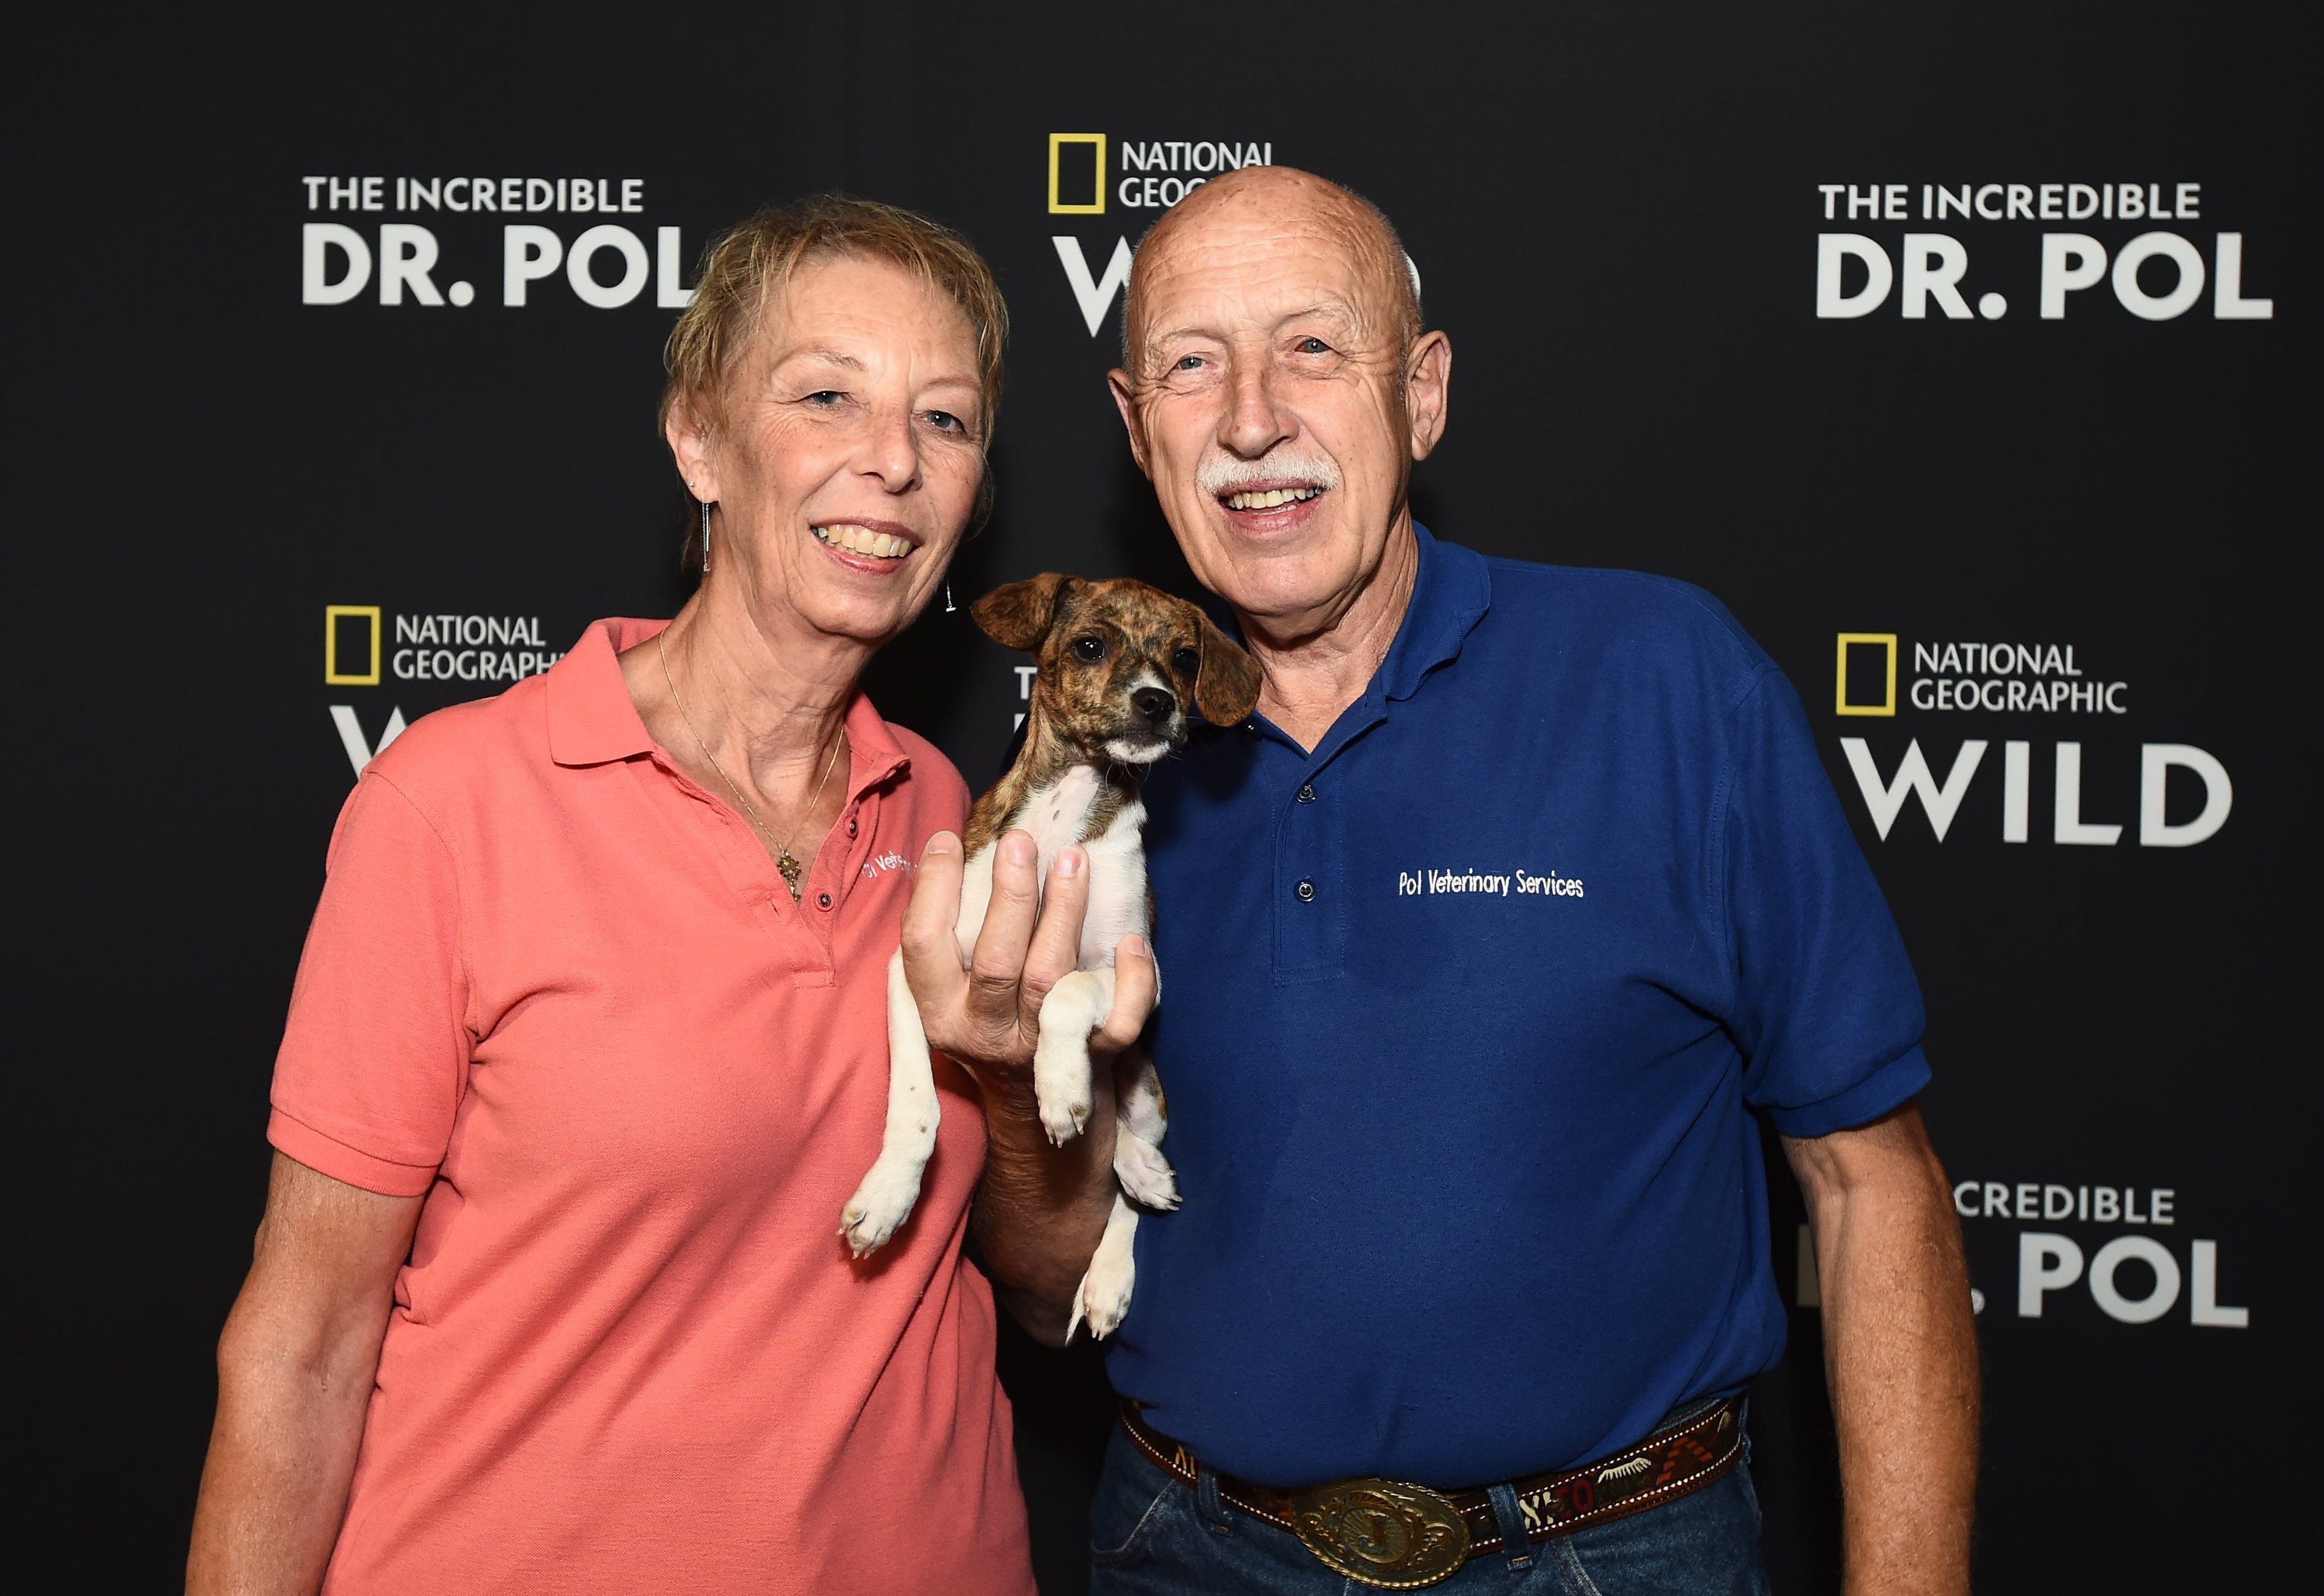 'The Incredible Dr. Pol' stars Diane Pol and veterinarian Dr. Jan Pol with a furry friend.